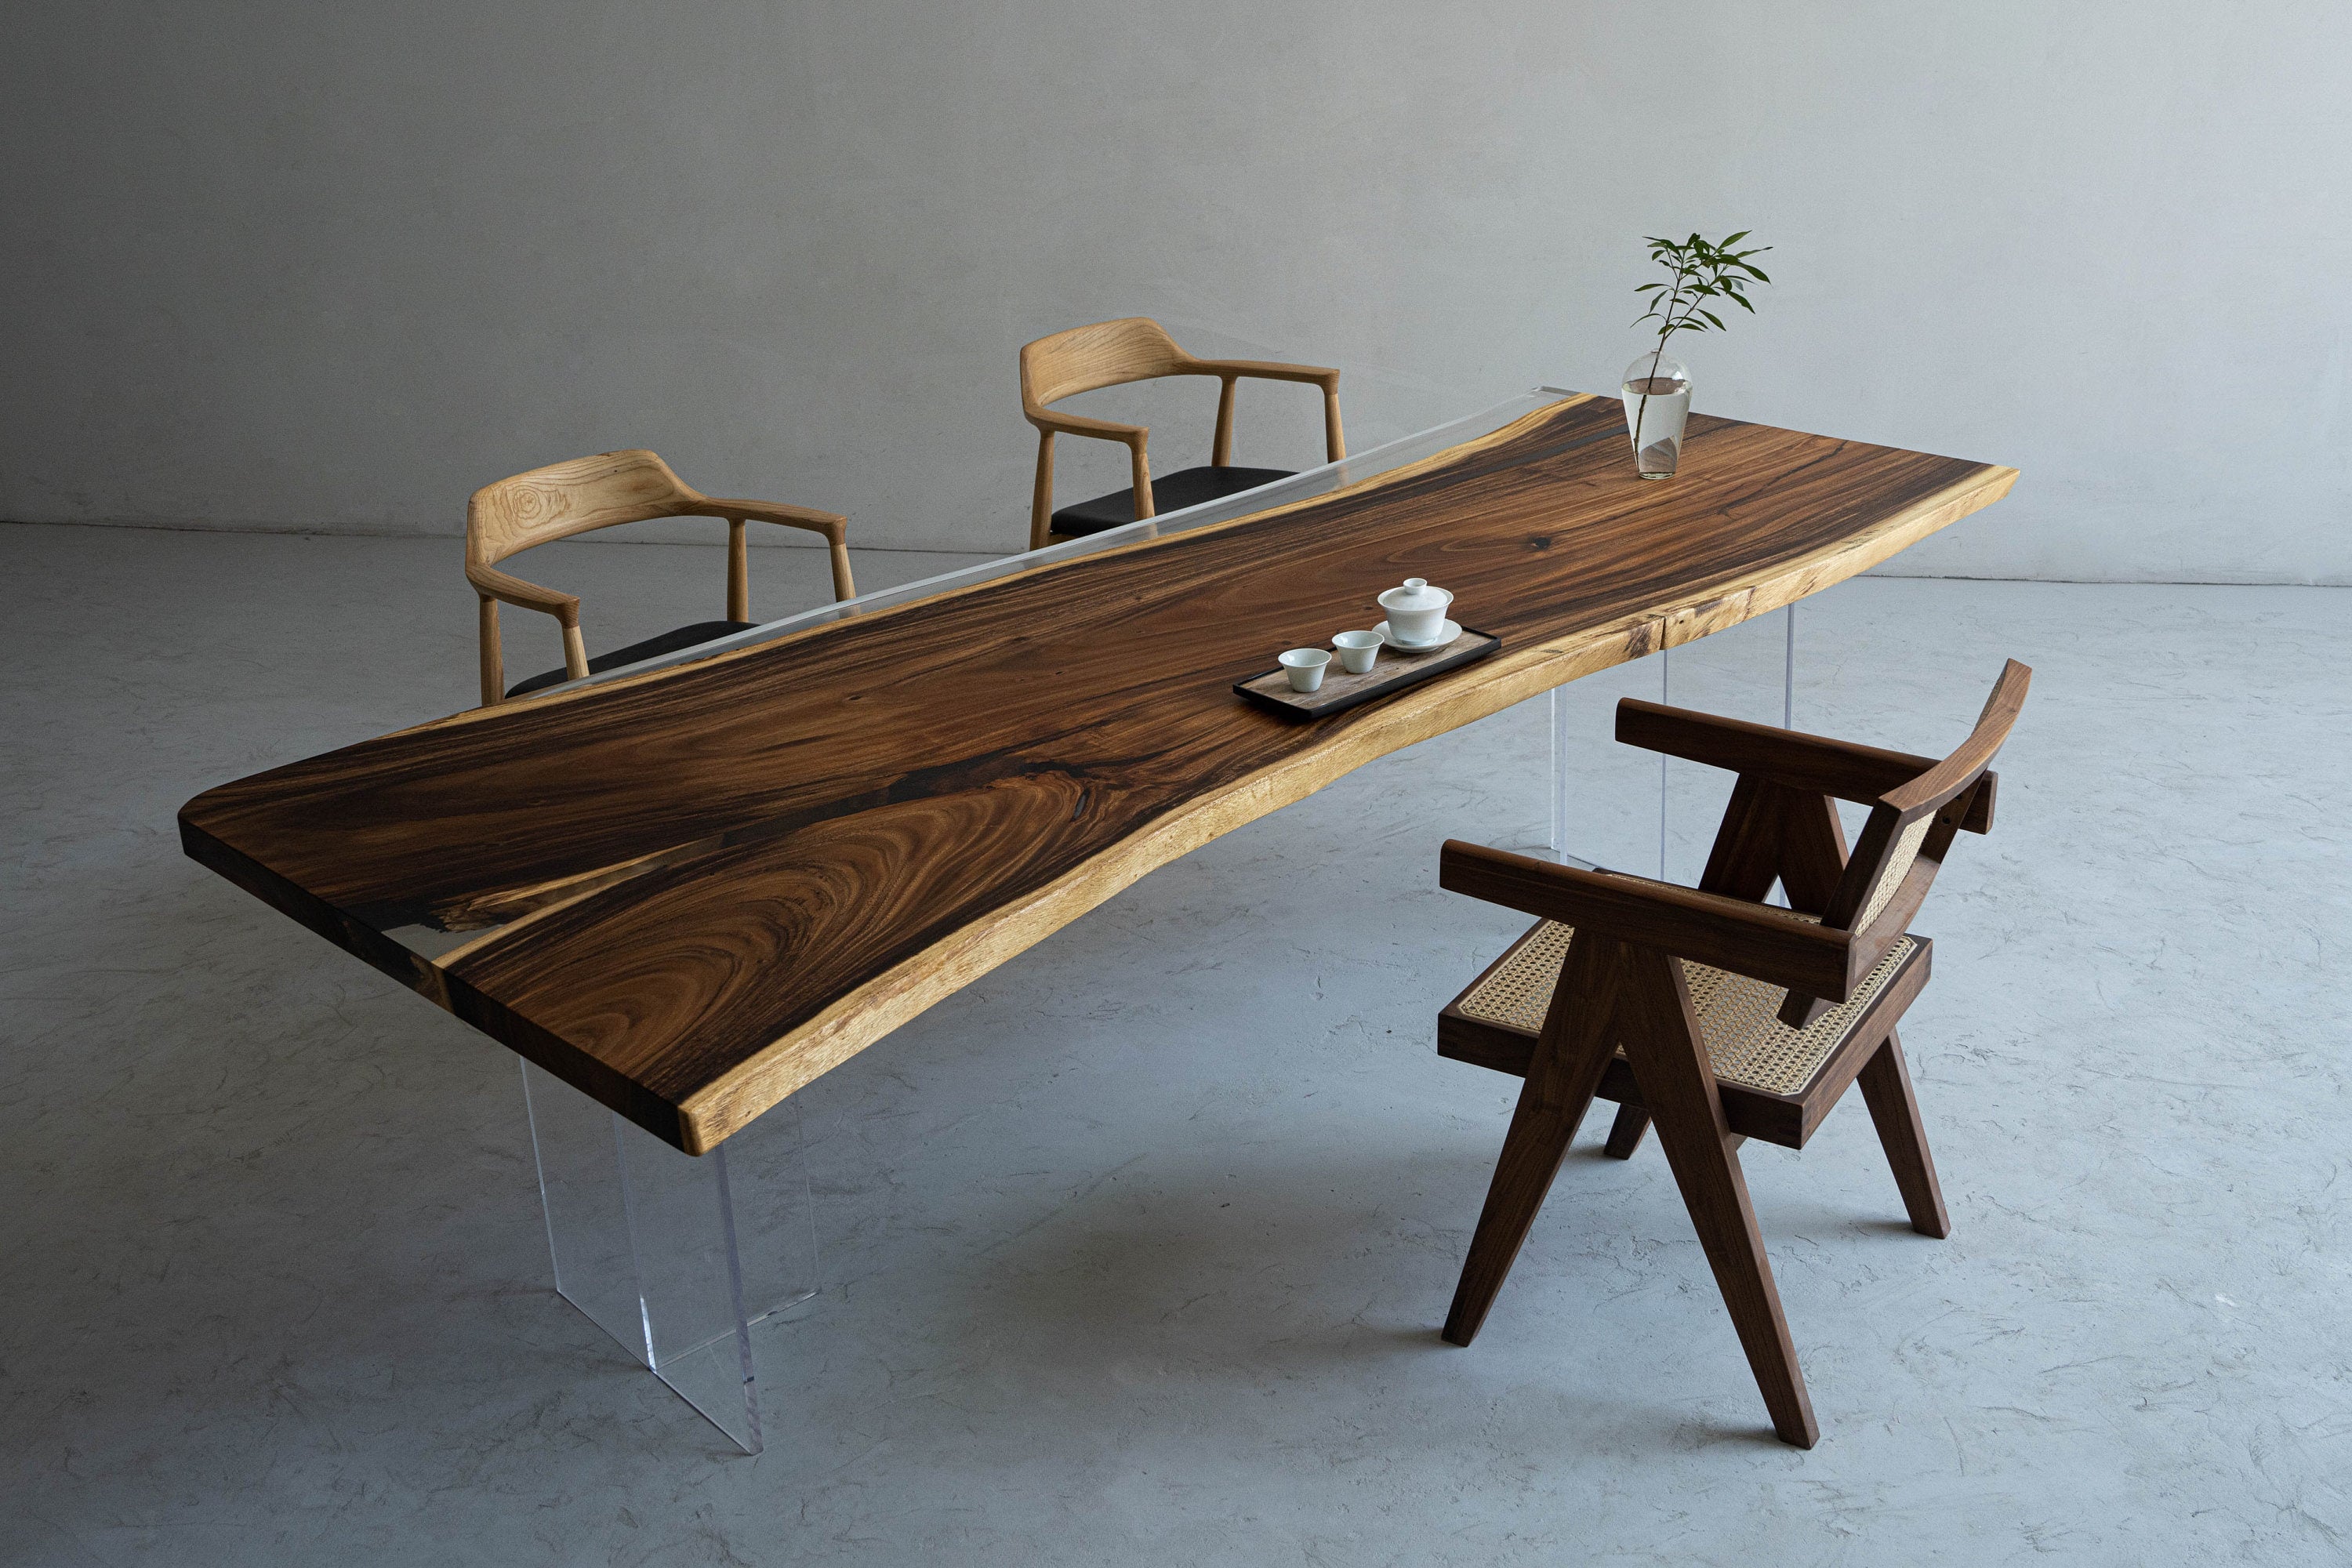 rectangle table, solid wood table,solid table,desk table, wood table